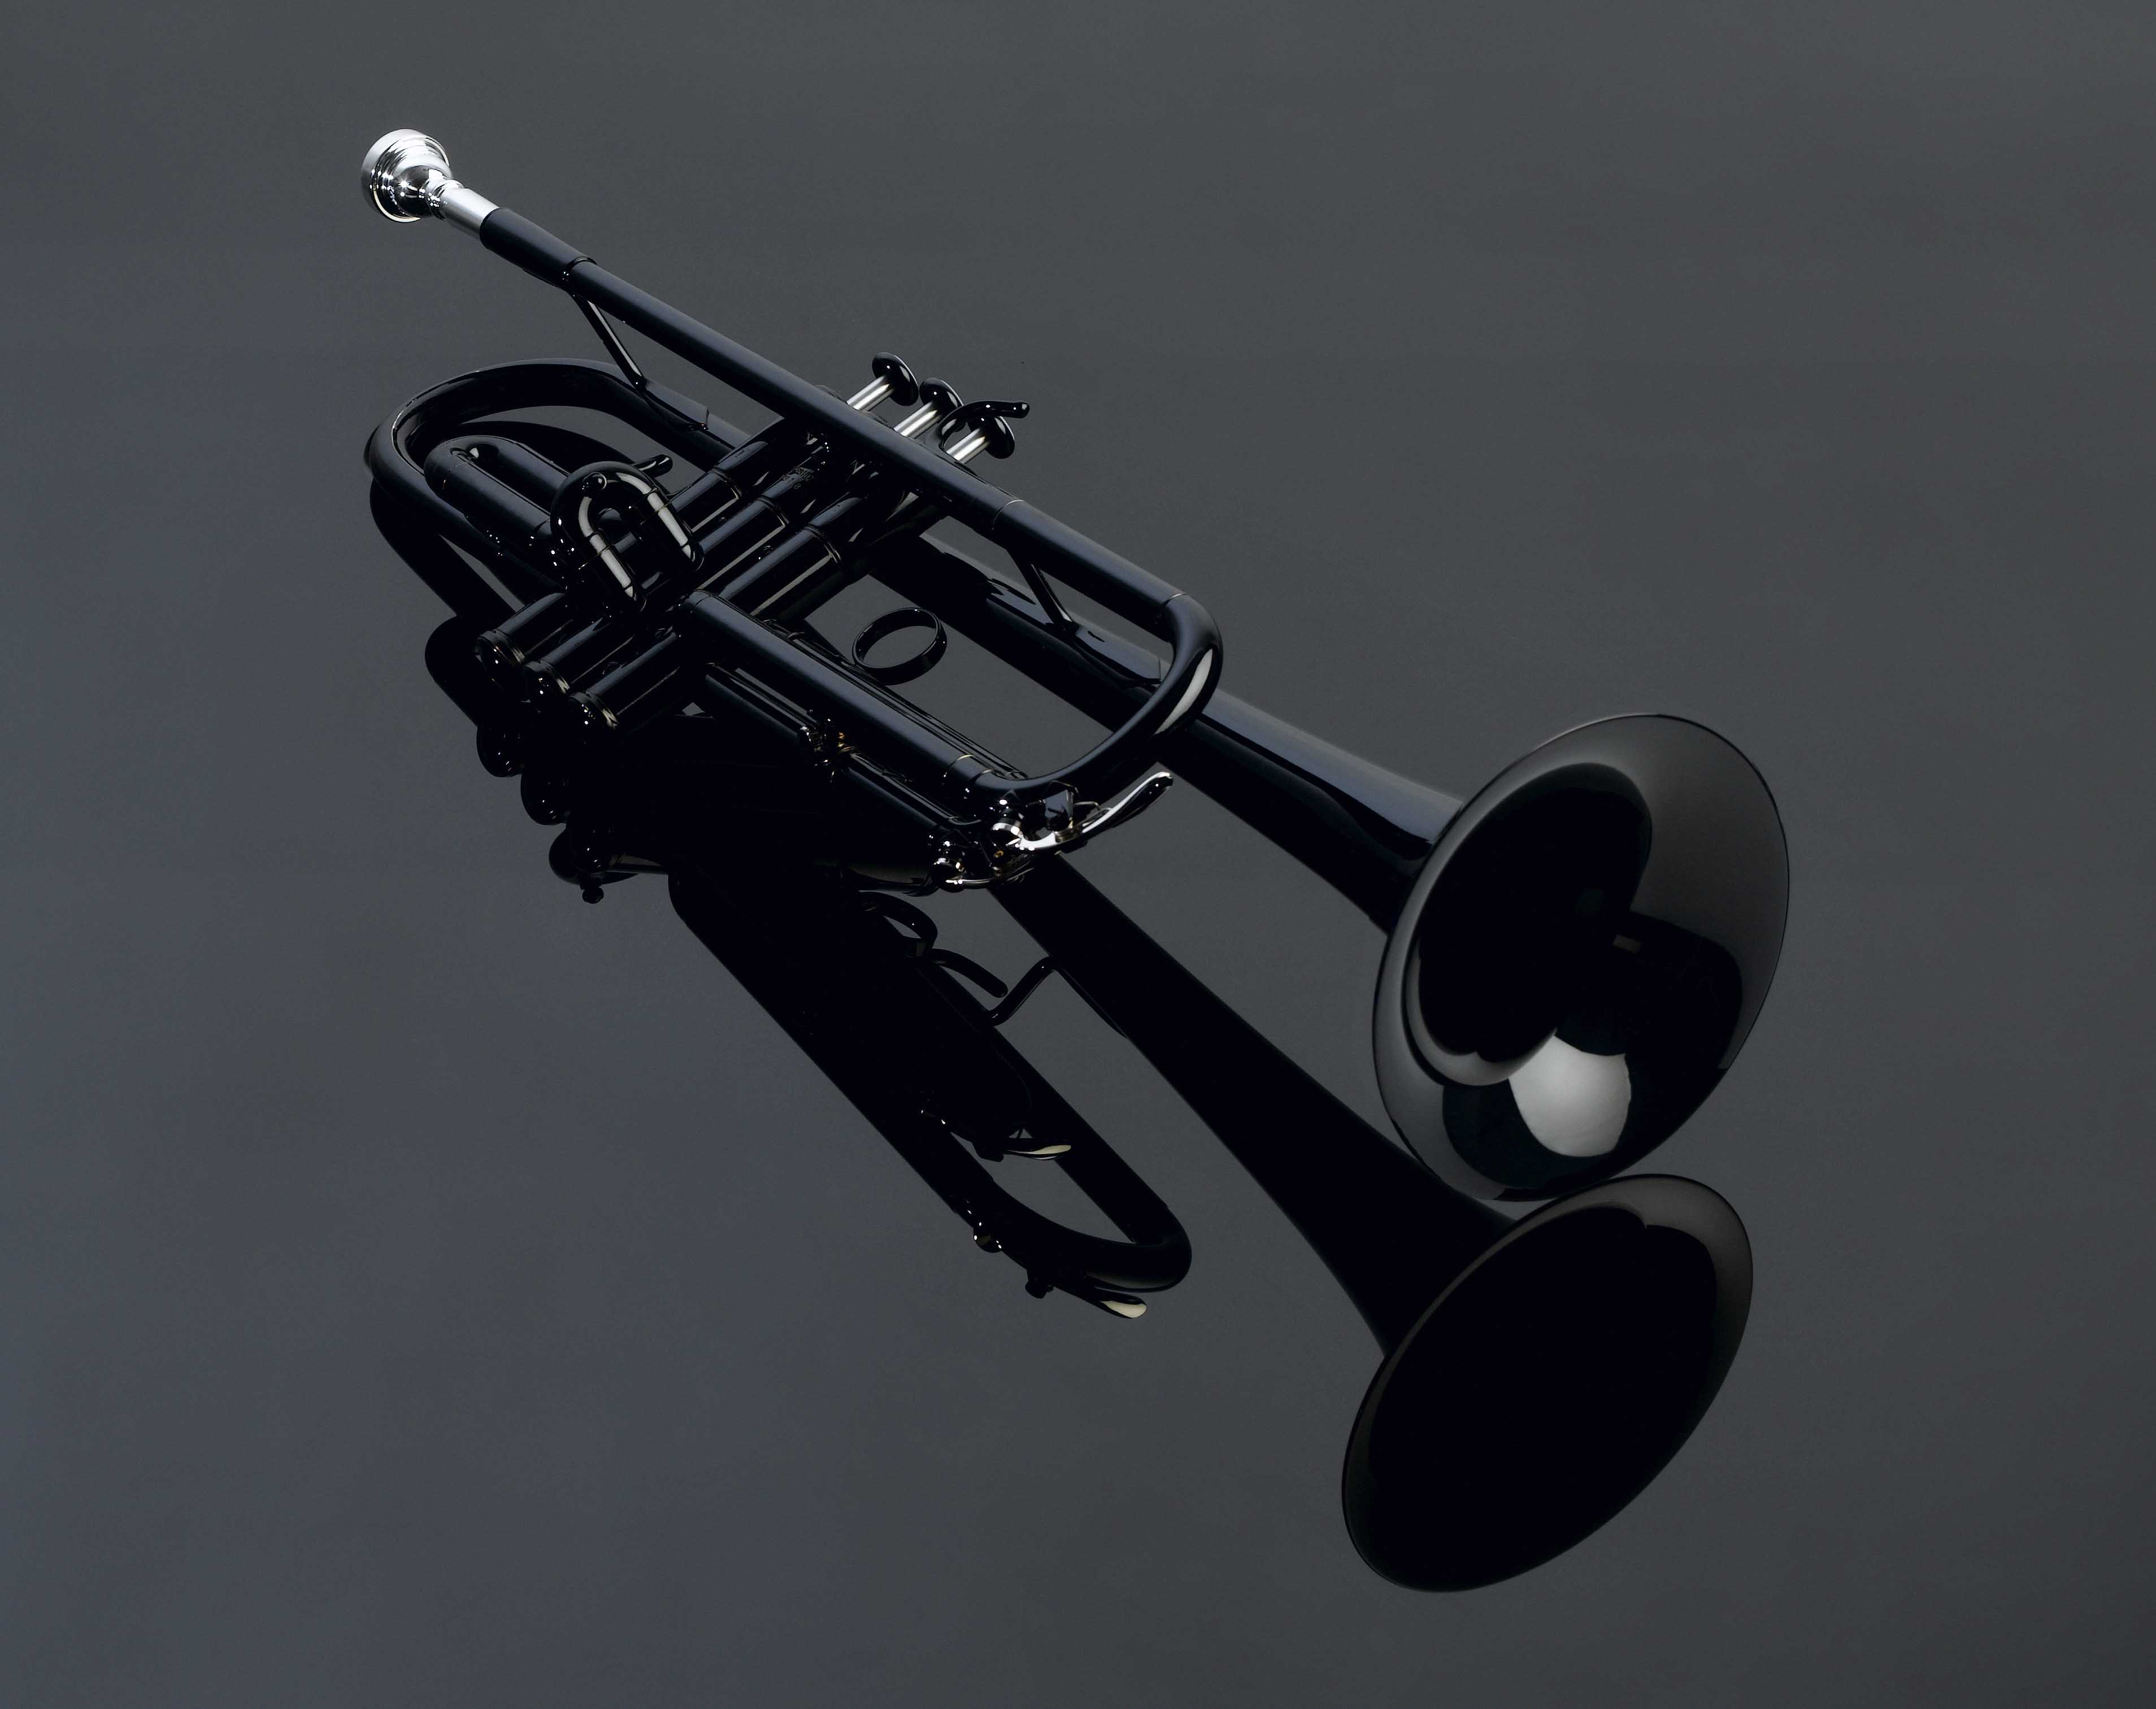 Orchestral colleagues share trumpet player’s joy at purchase of new, louder trumpet